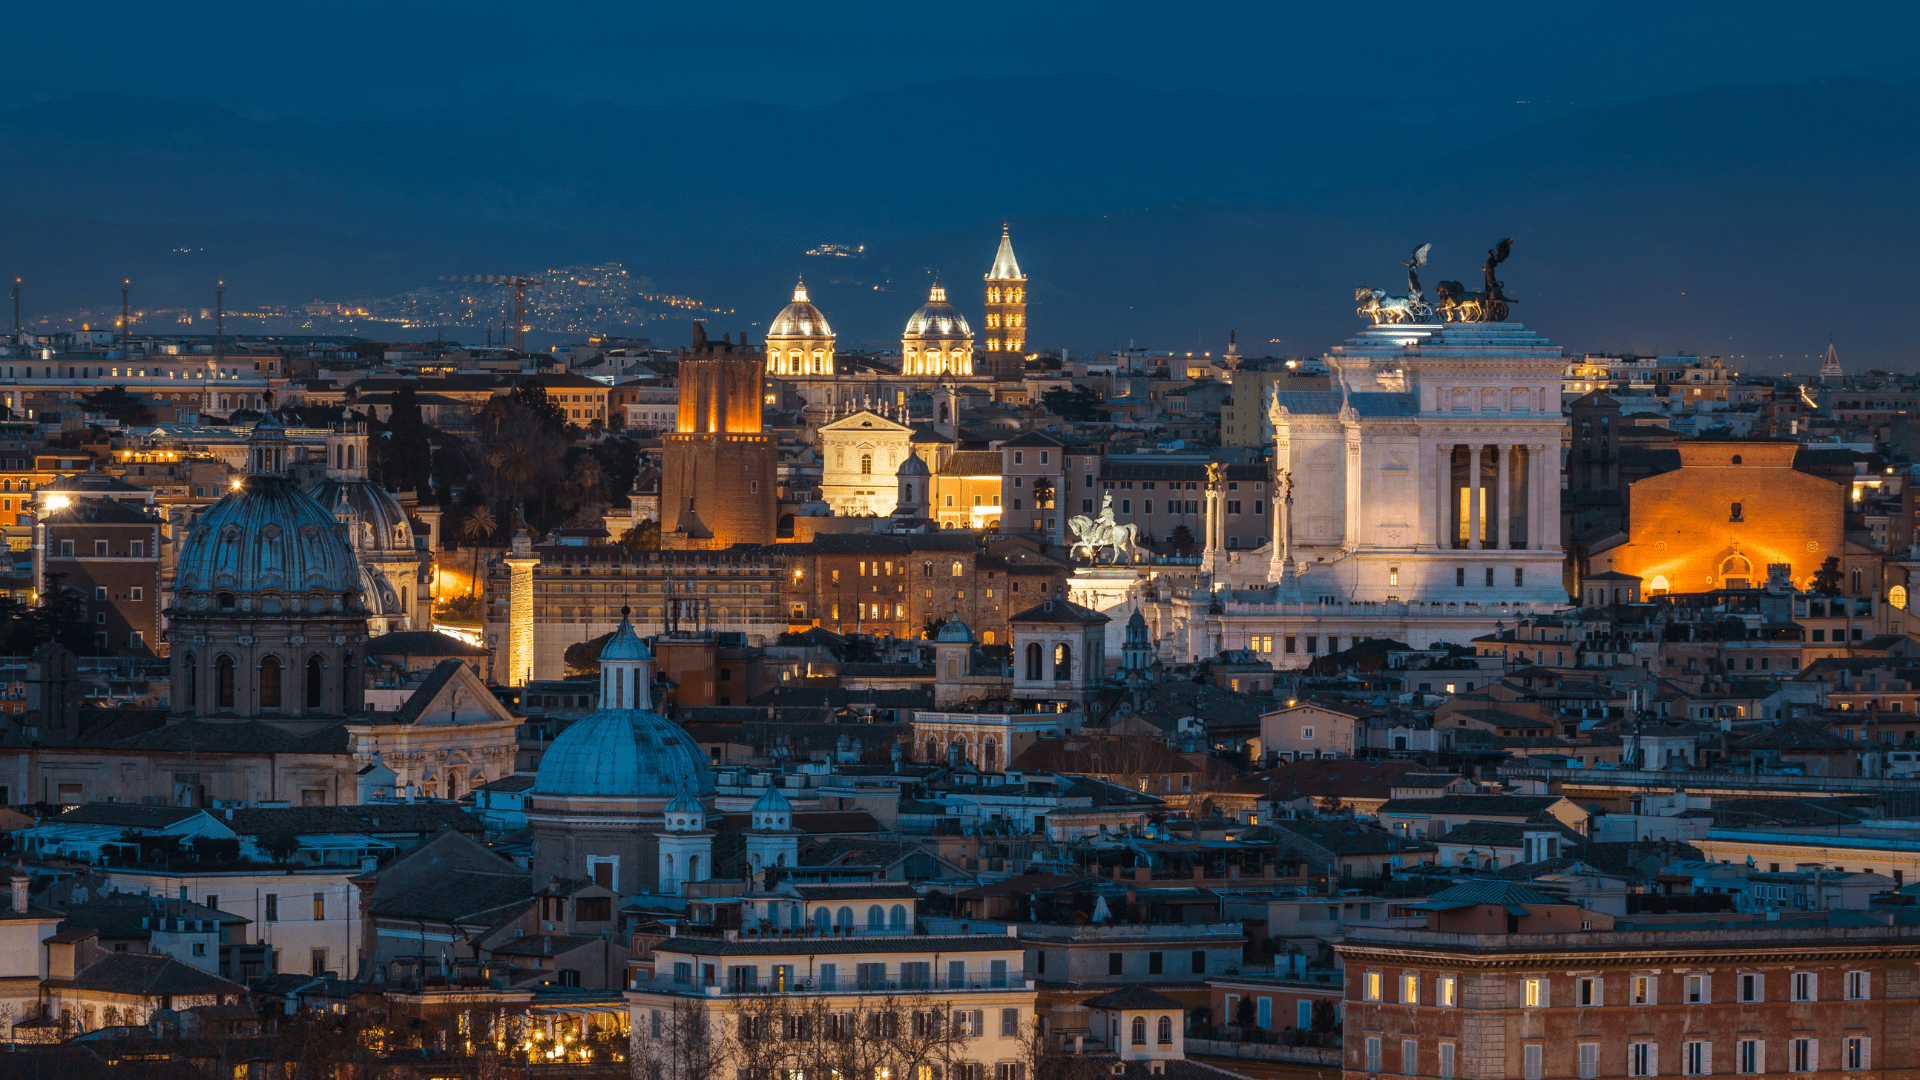 View from Gianicolo night. Free things to do in Rome. Free Rome. Rome on a budget